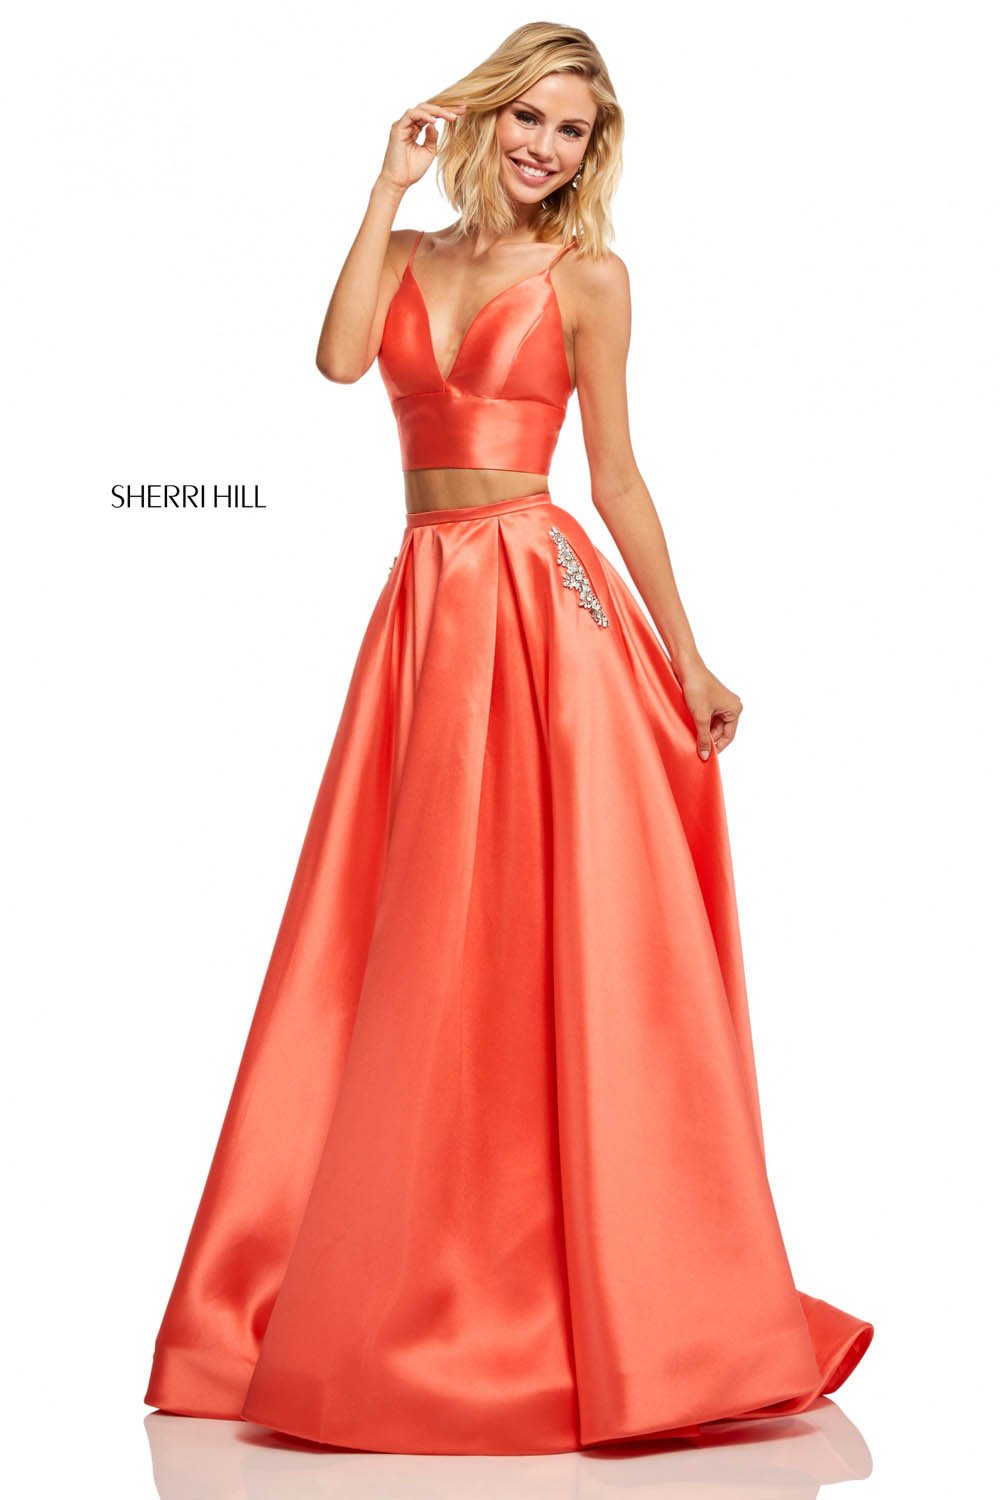 Sherri Hill 52598 dress images in these colors: Mocha, Violet, Red, Emerald, Coral, Yellow, Turquoise, Black.